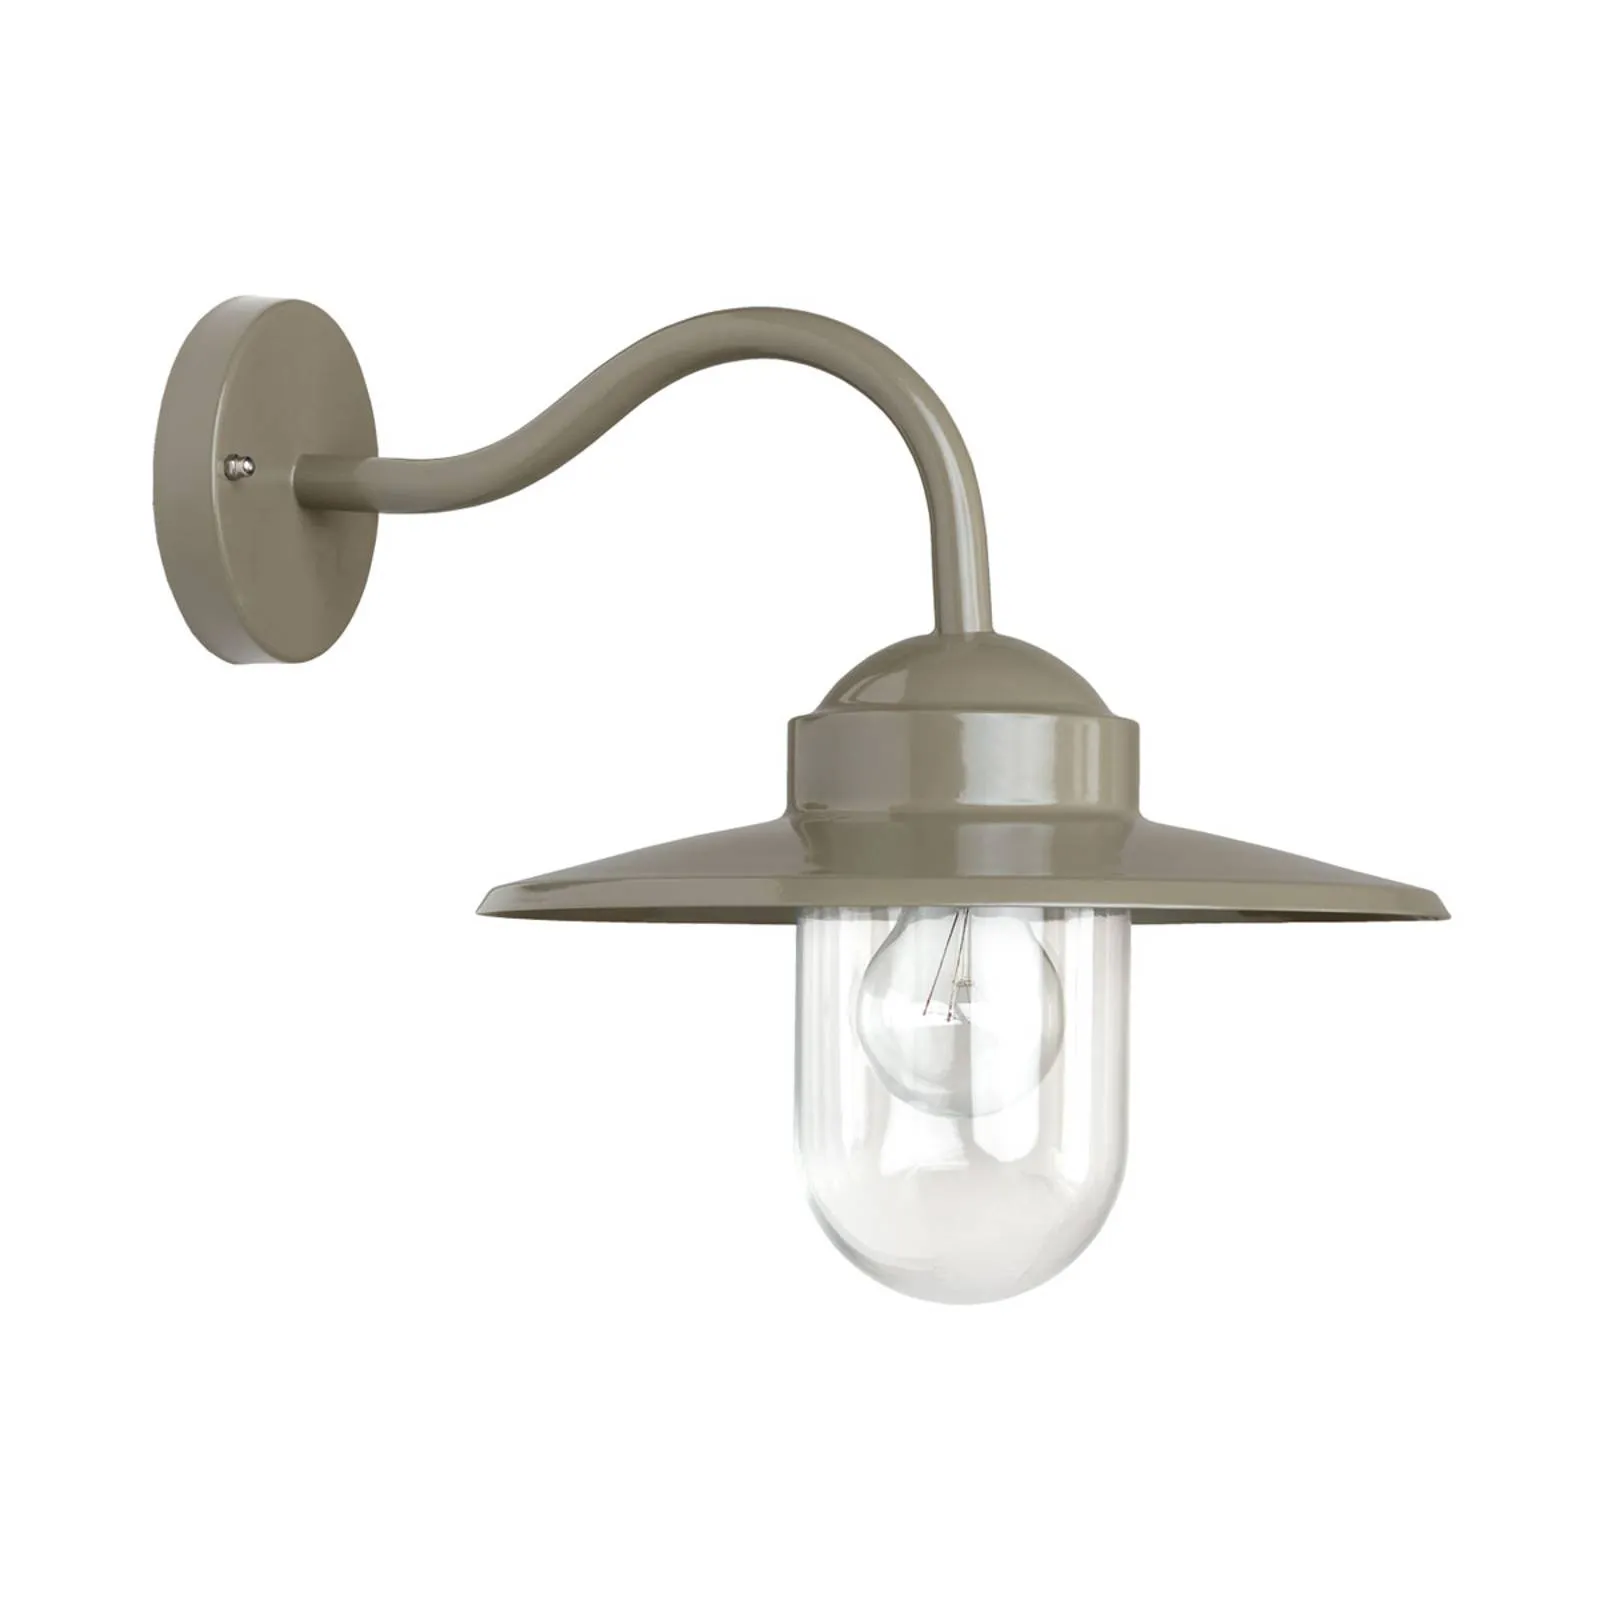 Taupe-coloured outdoor wall light Dolce